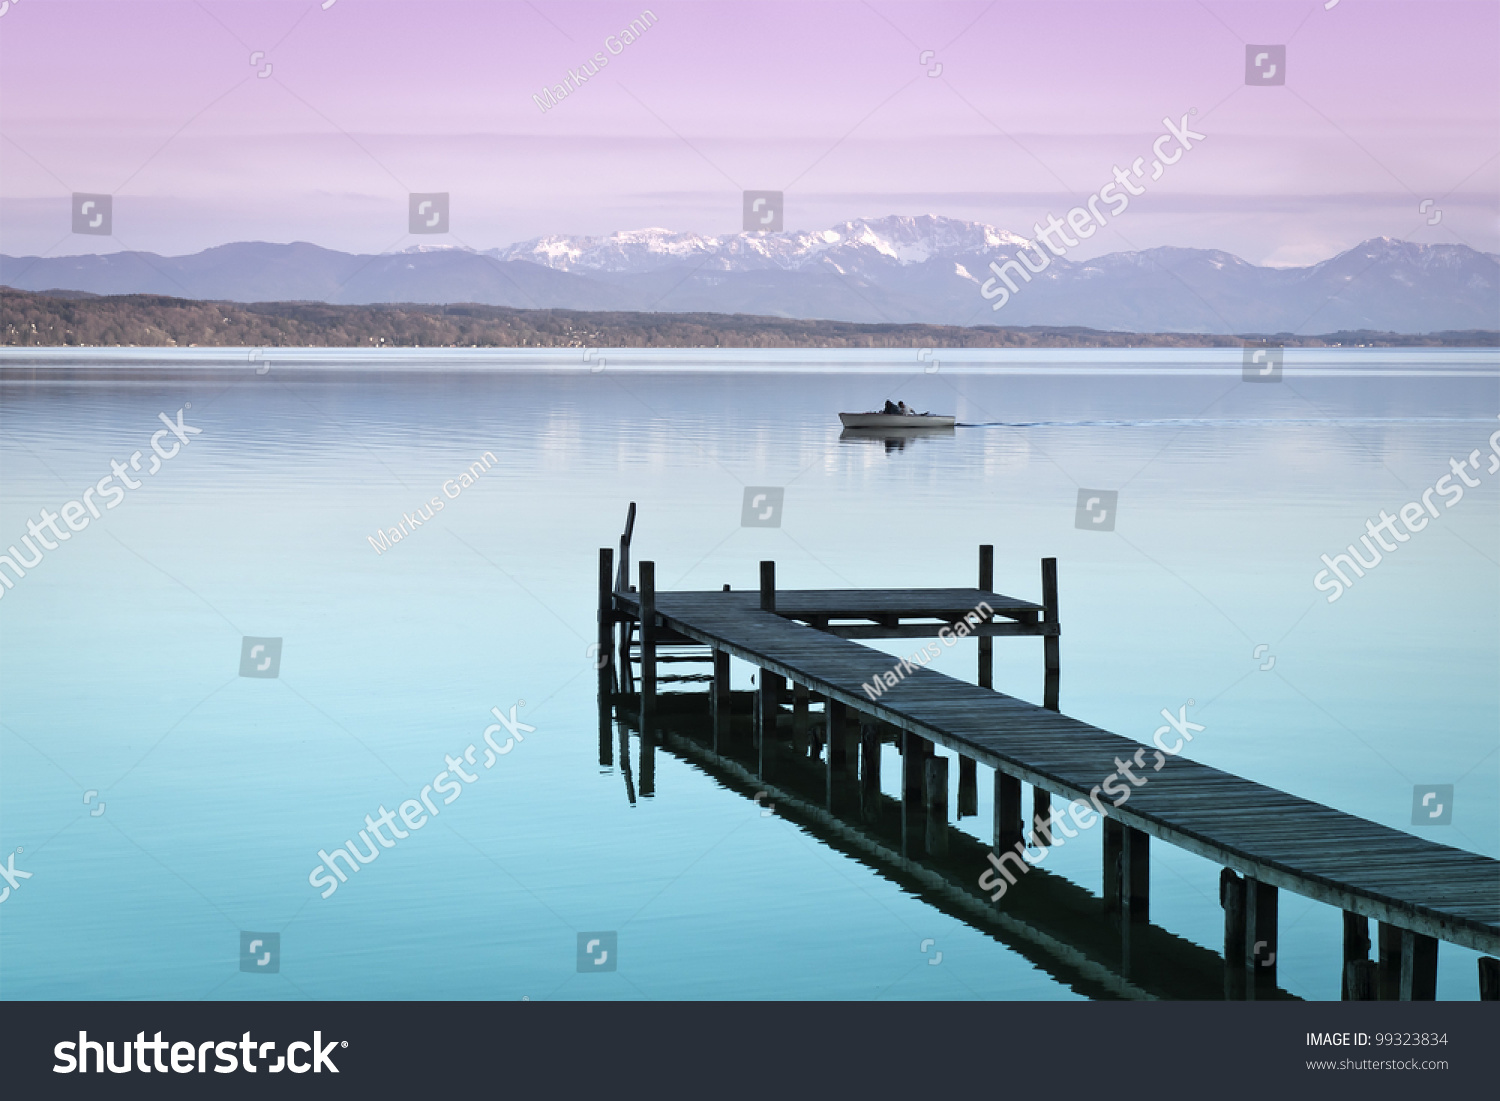 An image of a wooden jetty at the lake Starnberg in Bavaria Germany #99323834